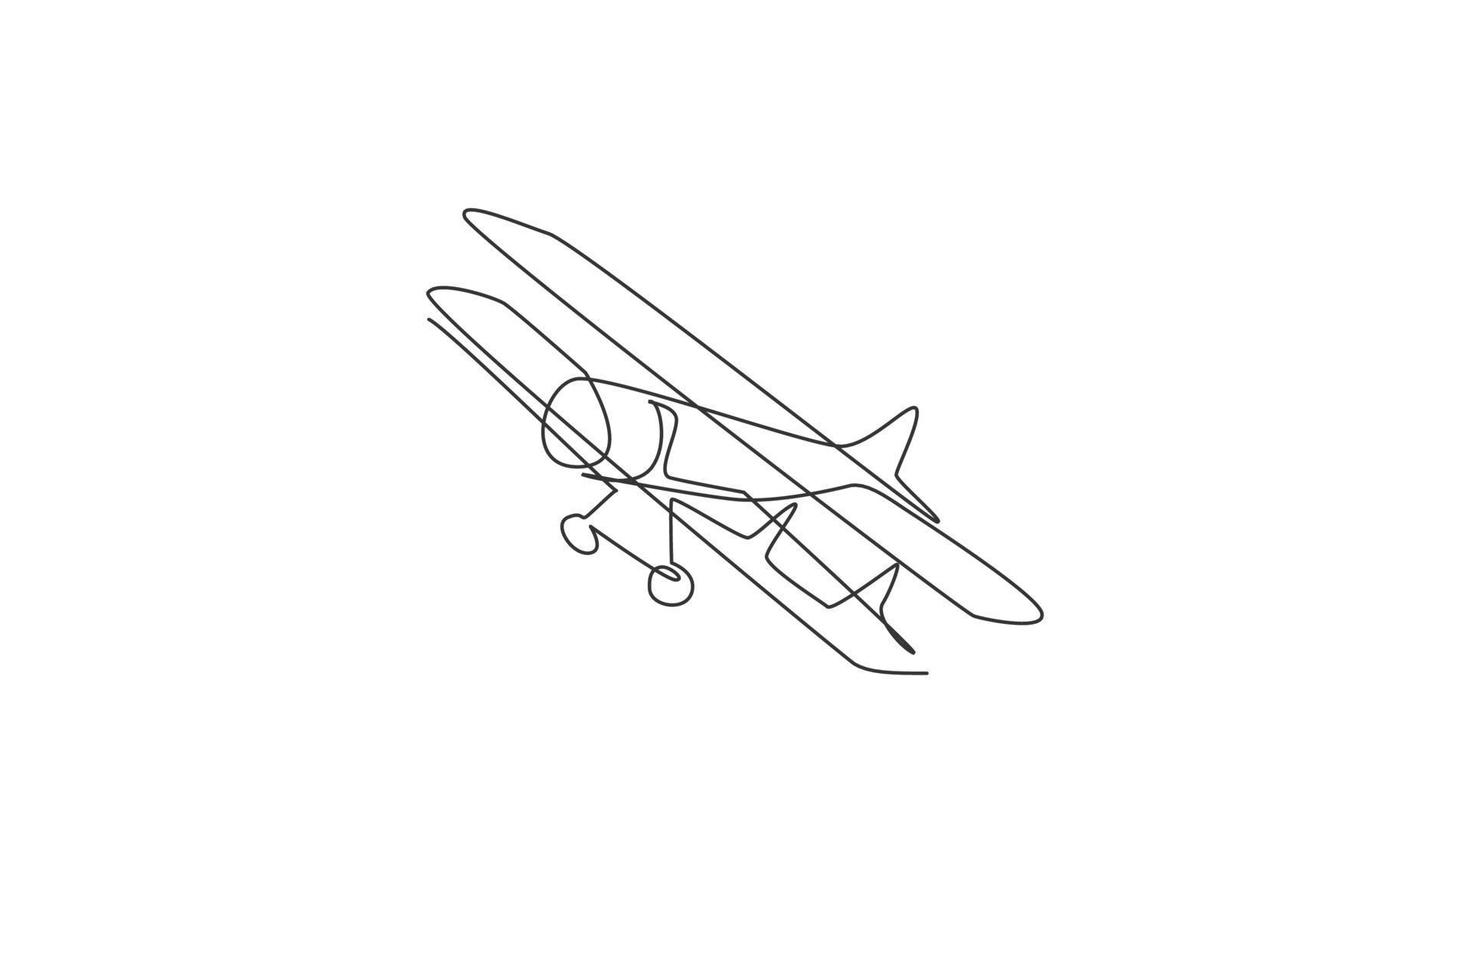 One single line drawing of vintage biplane flying on the sky vector illustration. Airplane vehicle for war concept. Modern continuous line draw graphic design